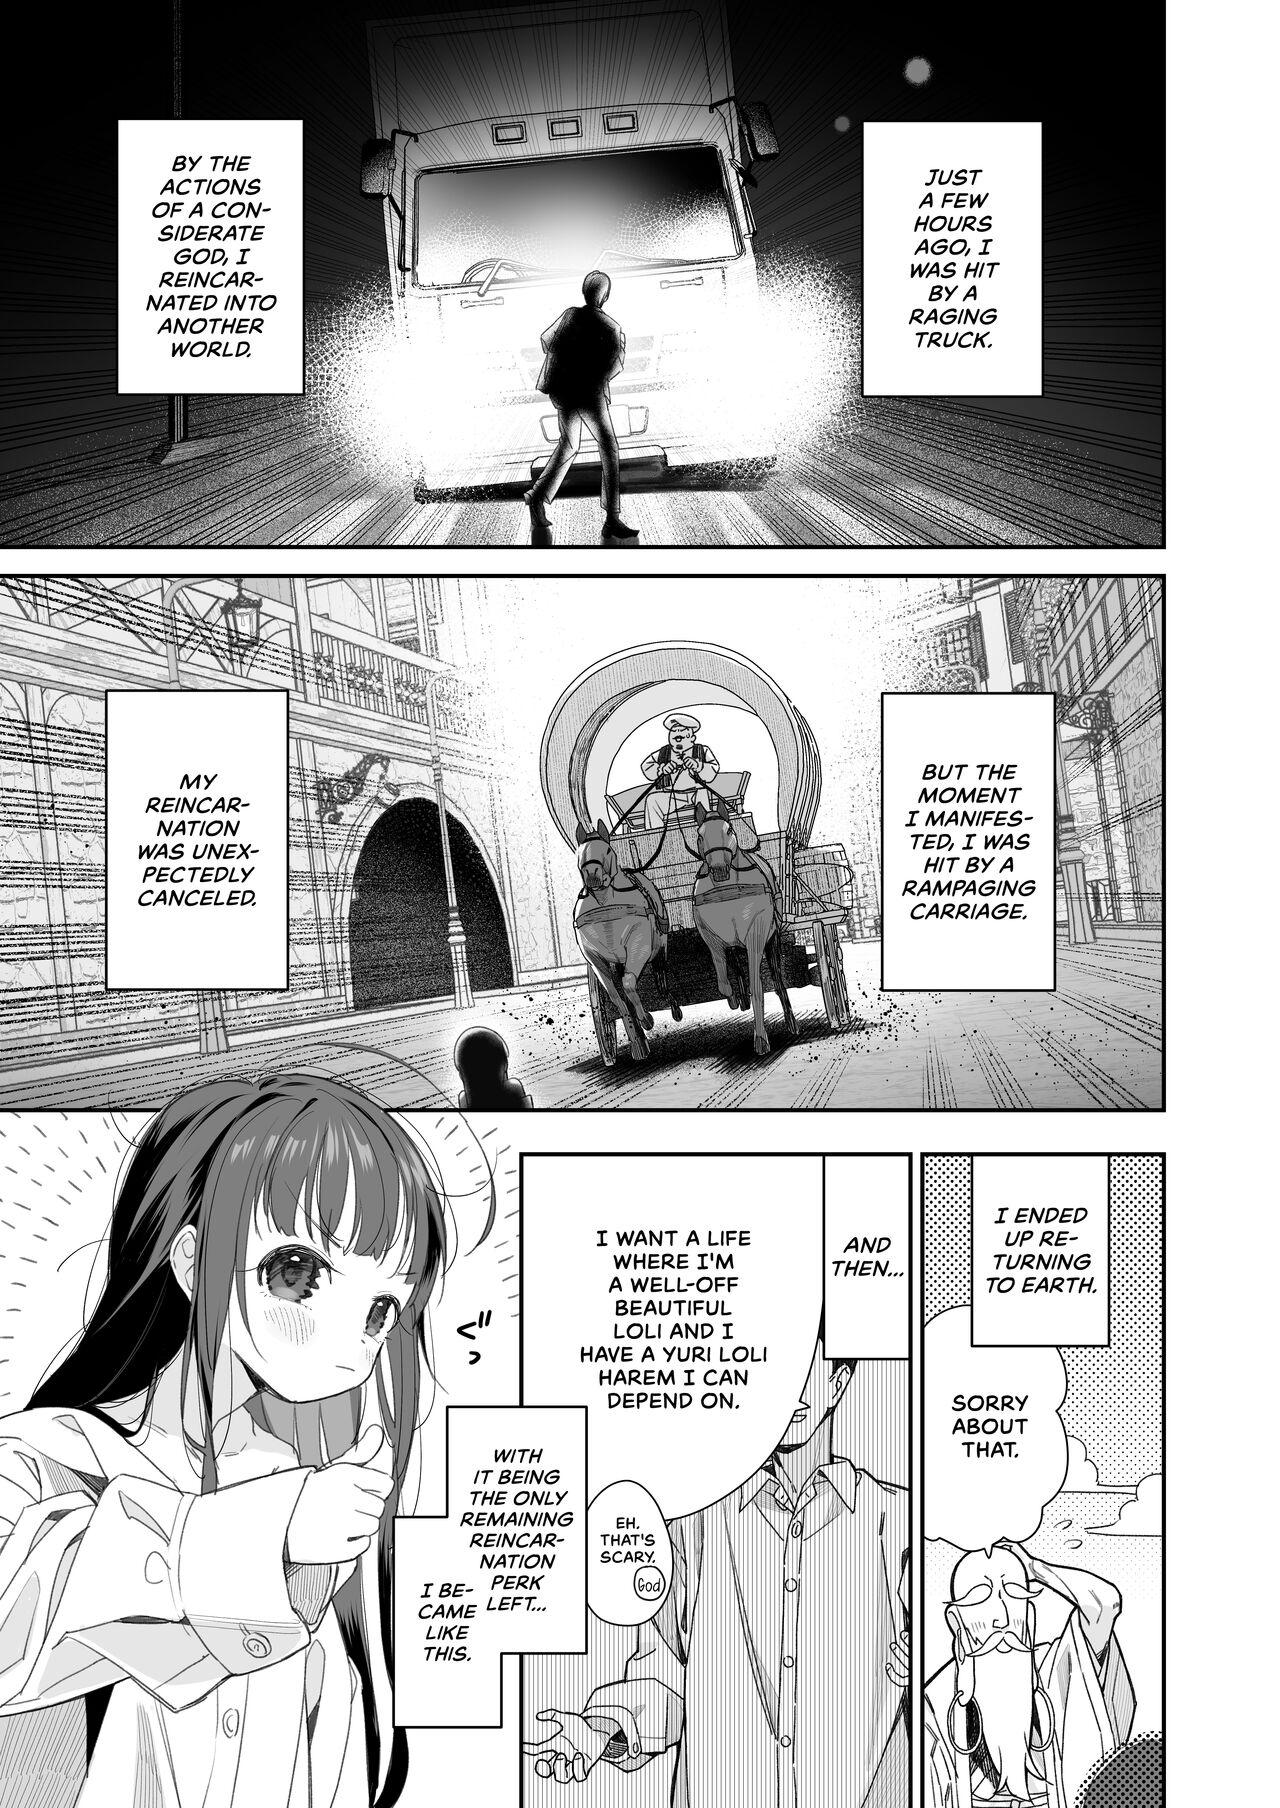 Big Boobs [Asunaro Neat. (Ronna)] TS Loli Oji-san no Bouken Onanie Hen | The Adventures of an Old Man Who Was Gender-Swapped Into a Loli ~Masturbation Chapter~ [English] [CulturedCommissions] [Digital] - Original Girl Gets Fucked - Page 4